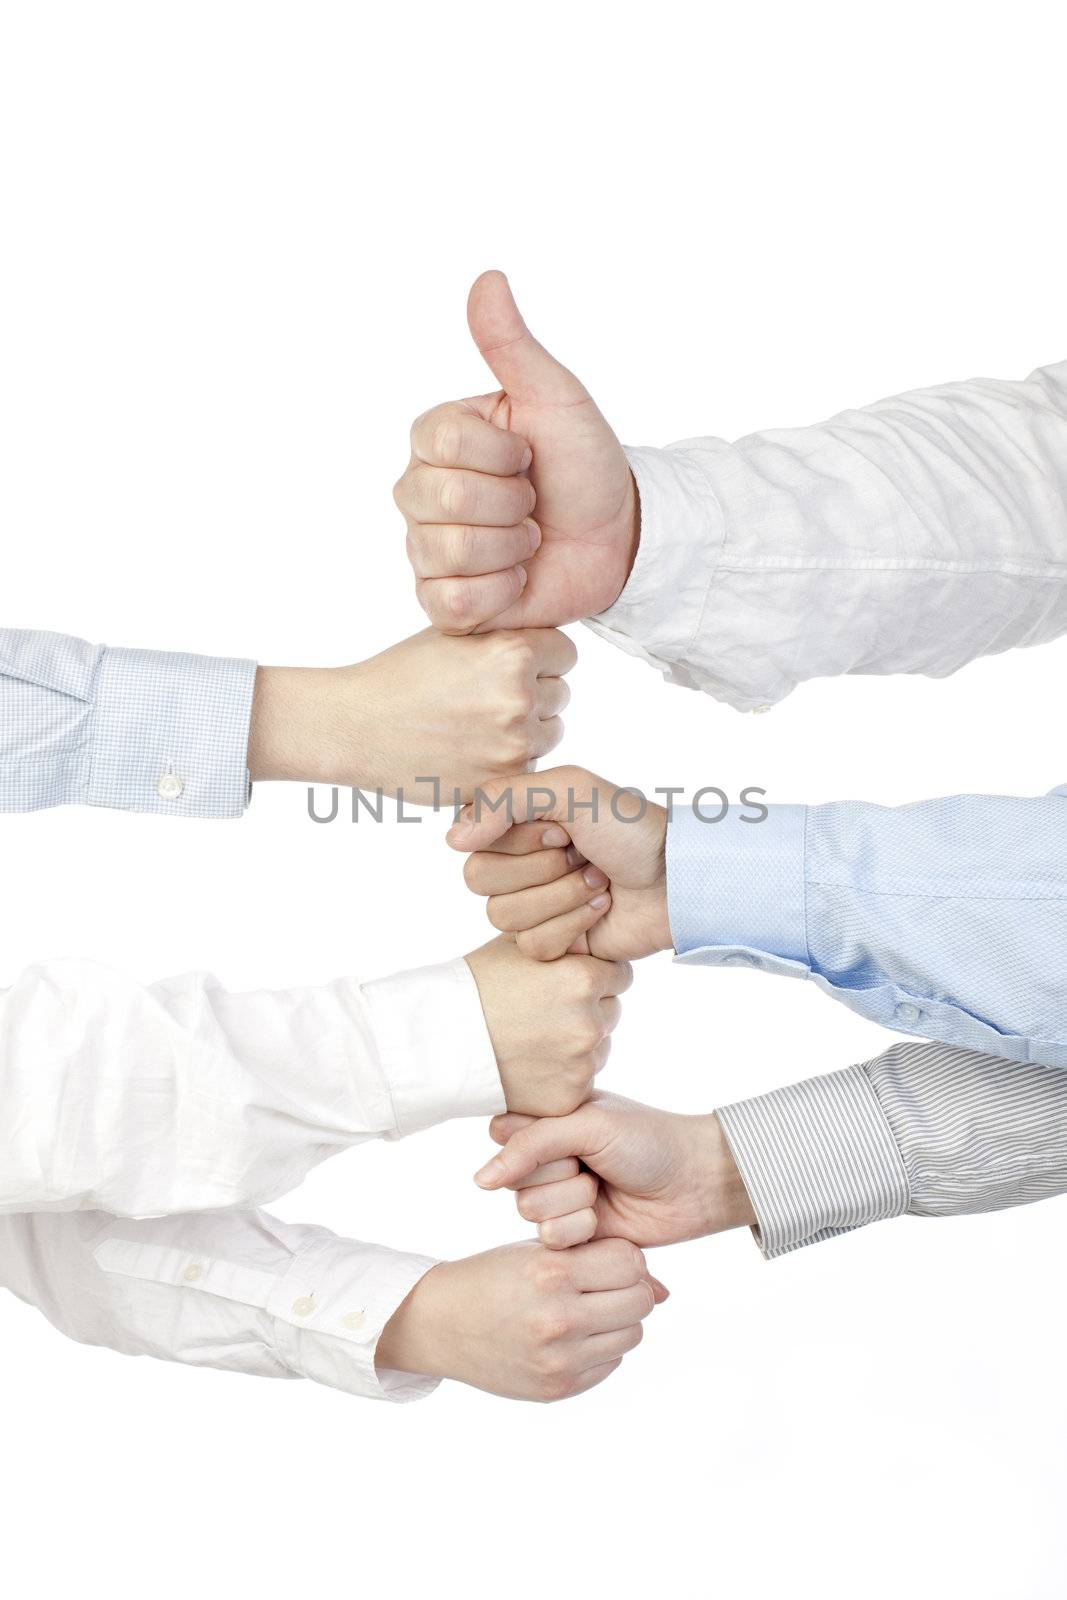 group of hand with fist bumping by rusuangela